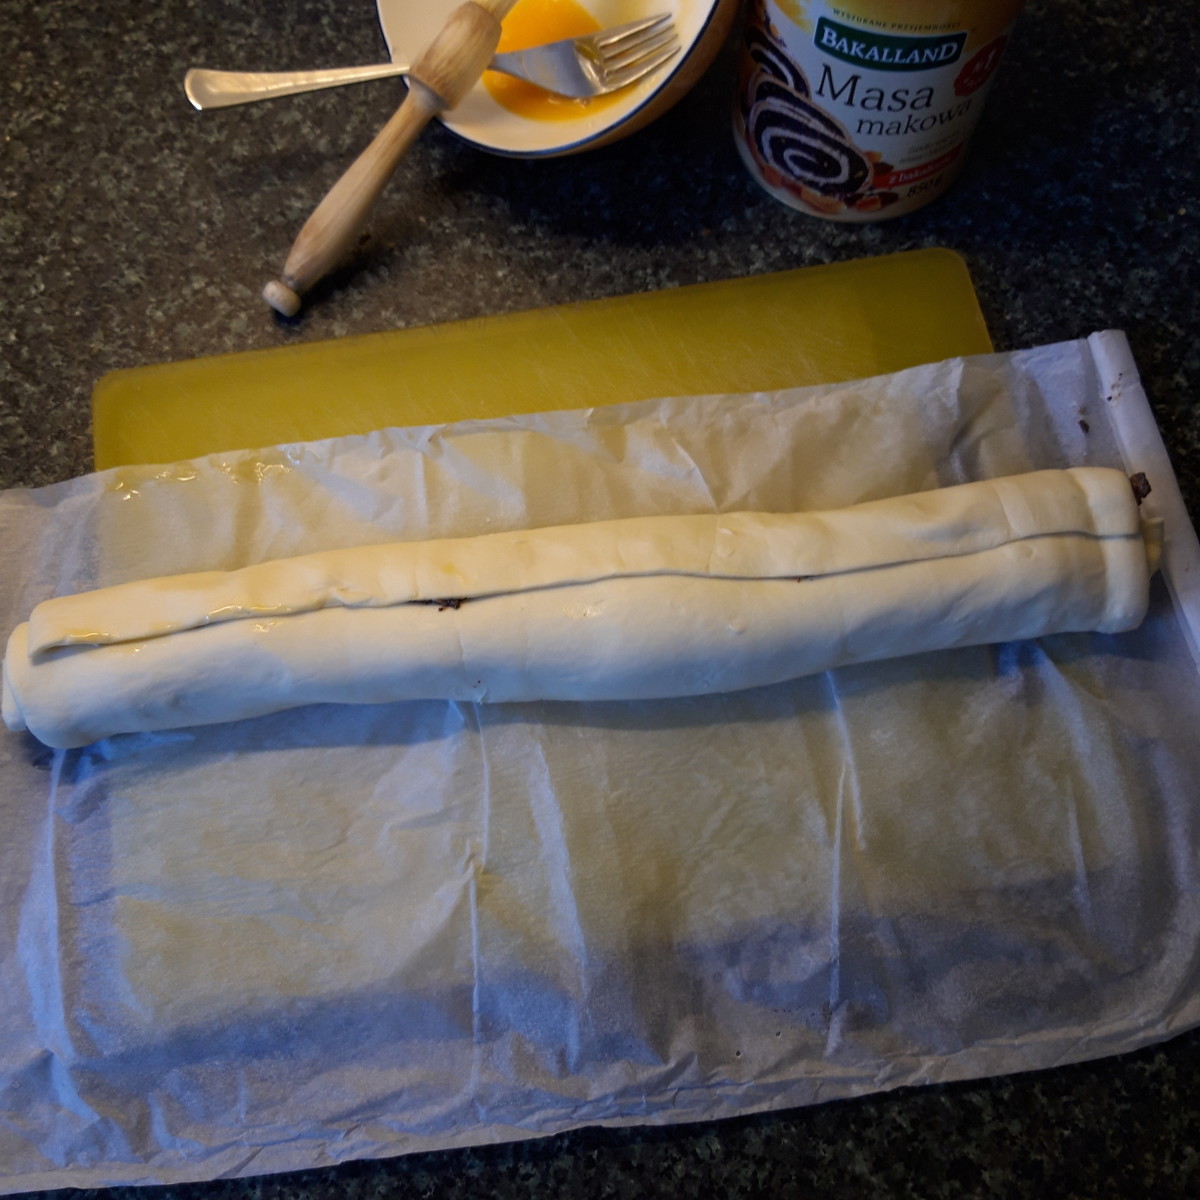 Roll the pastry lengthwise into a long sausage.